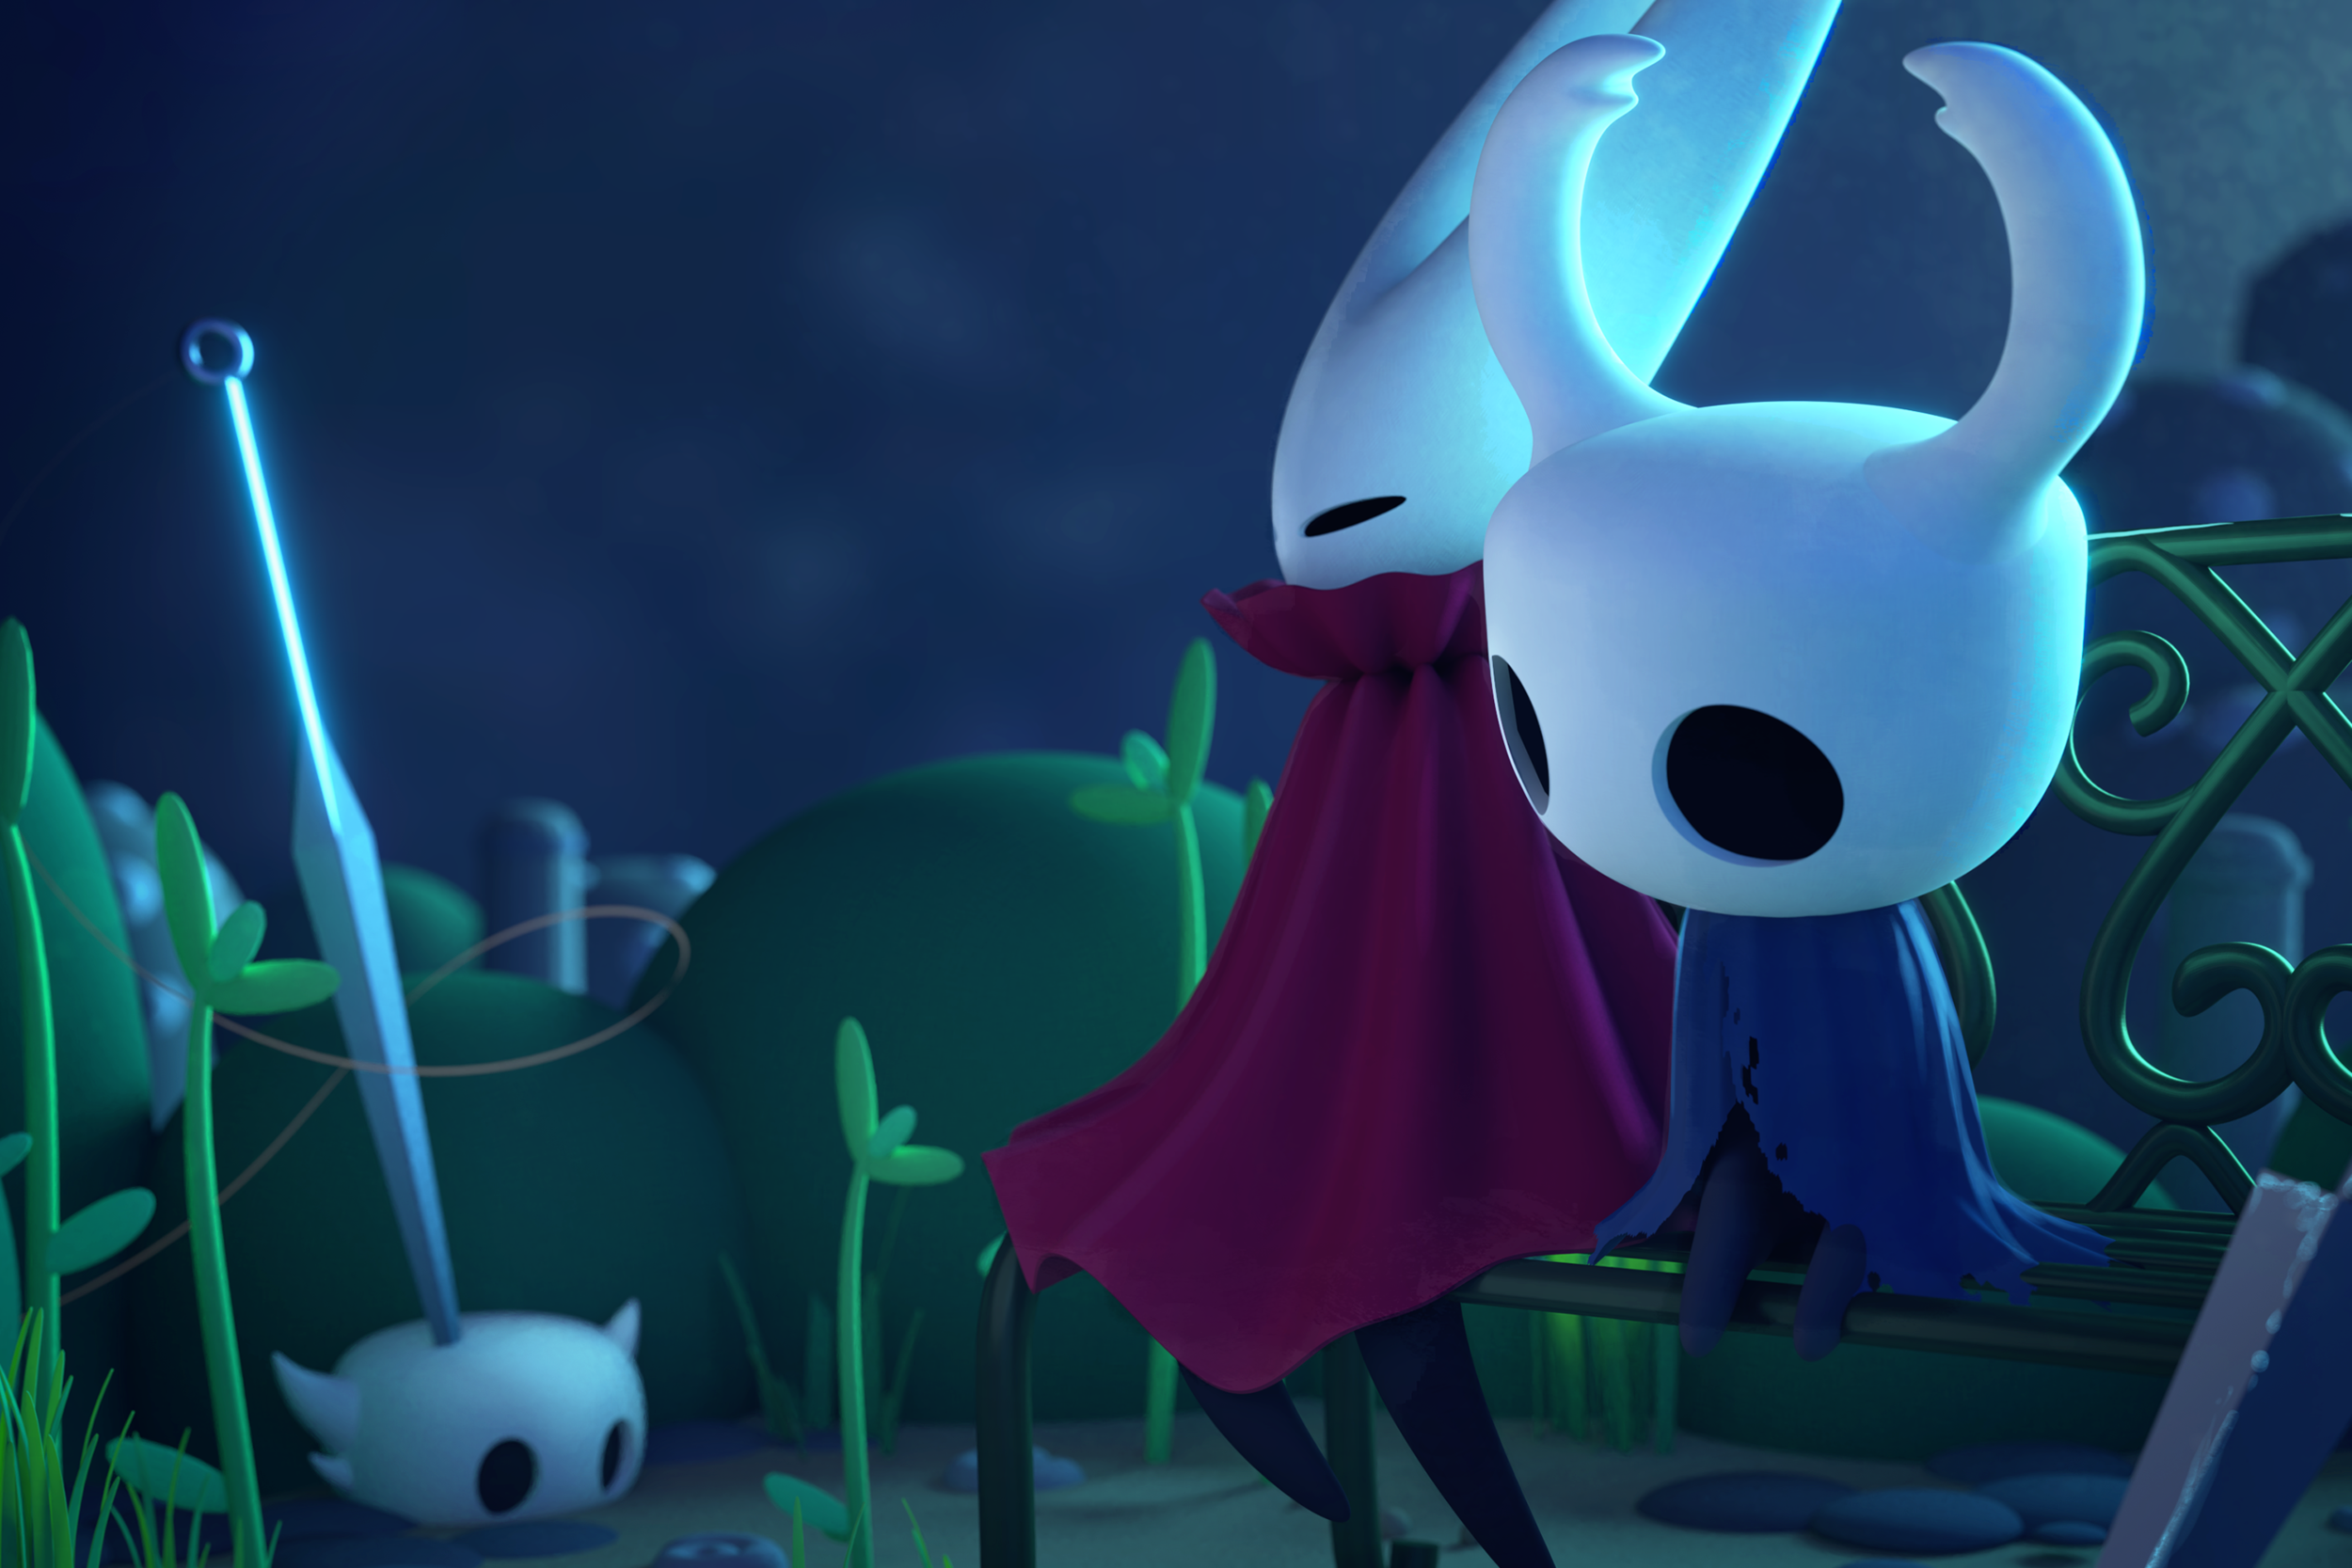 22 Hollow knight.png